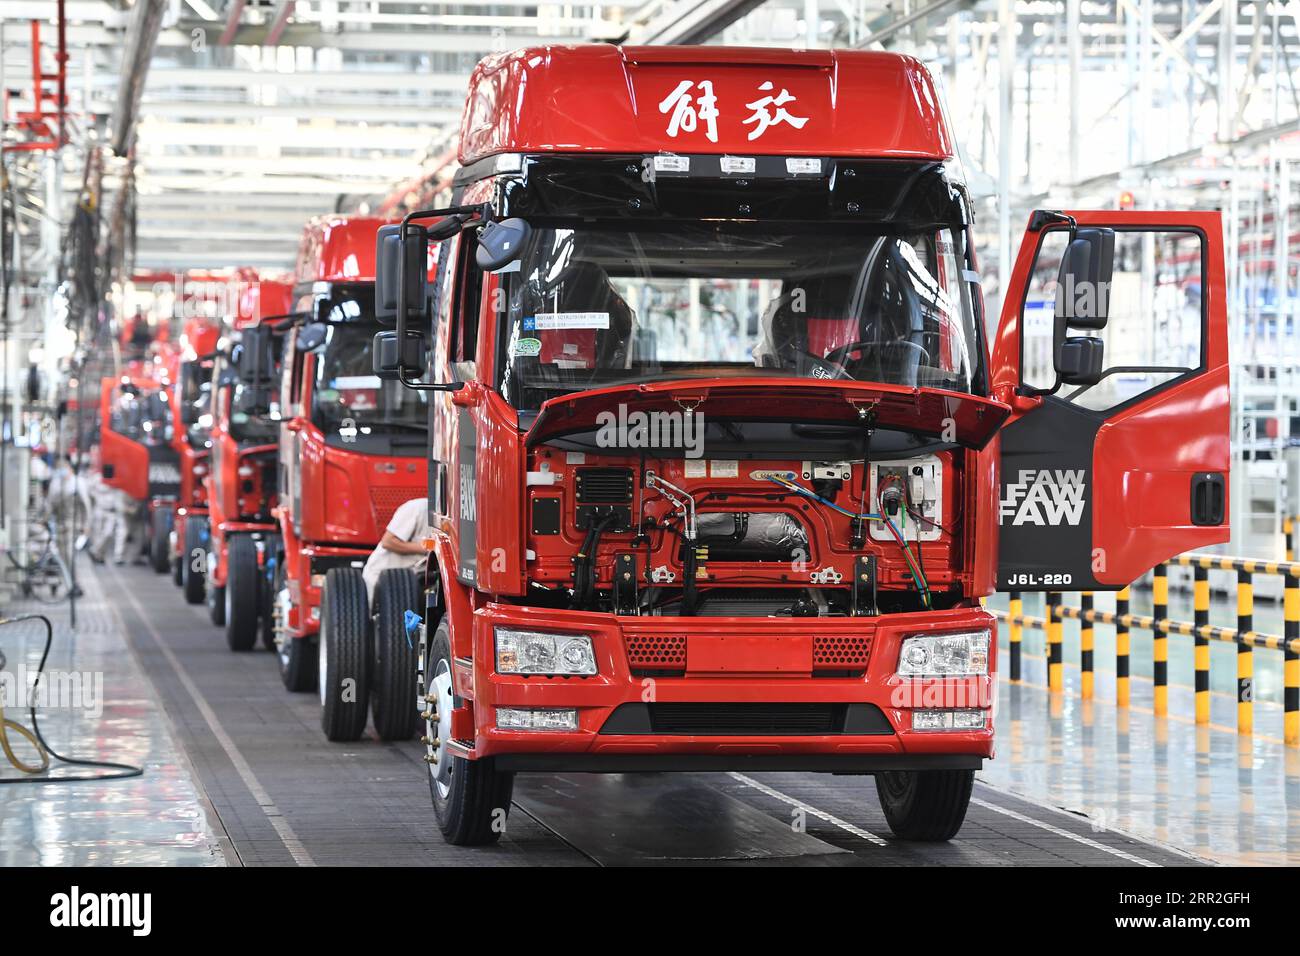 201012 -- CHANGCHUN, Oct. 12, 2020 -- Vehicles wait for assembling at a factory of the First Automotive Works FAW Group Co., Ltd. in Changchun, capital of northeast China s Jilin Province, Sept. 23, 2020. China s leading automaker First Automotive Works FAW Group Co., Ltd. sold 2,656,744 vehicles in the first three quarters of the year, up 8 percent year on year, according to corporate sources.  CHINA-CHANGCHUN-FAW-SALES-GROWTH CN ZhangxNan PUBLICATIONxNOTxINxCHN Stock Photo